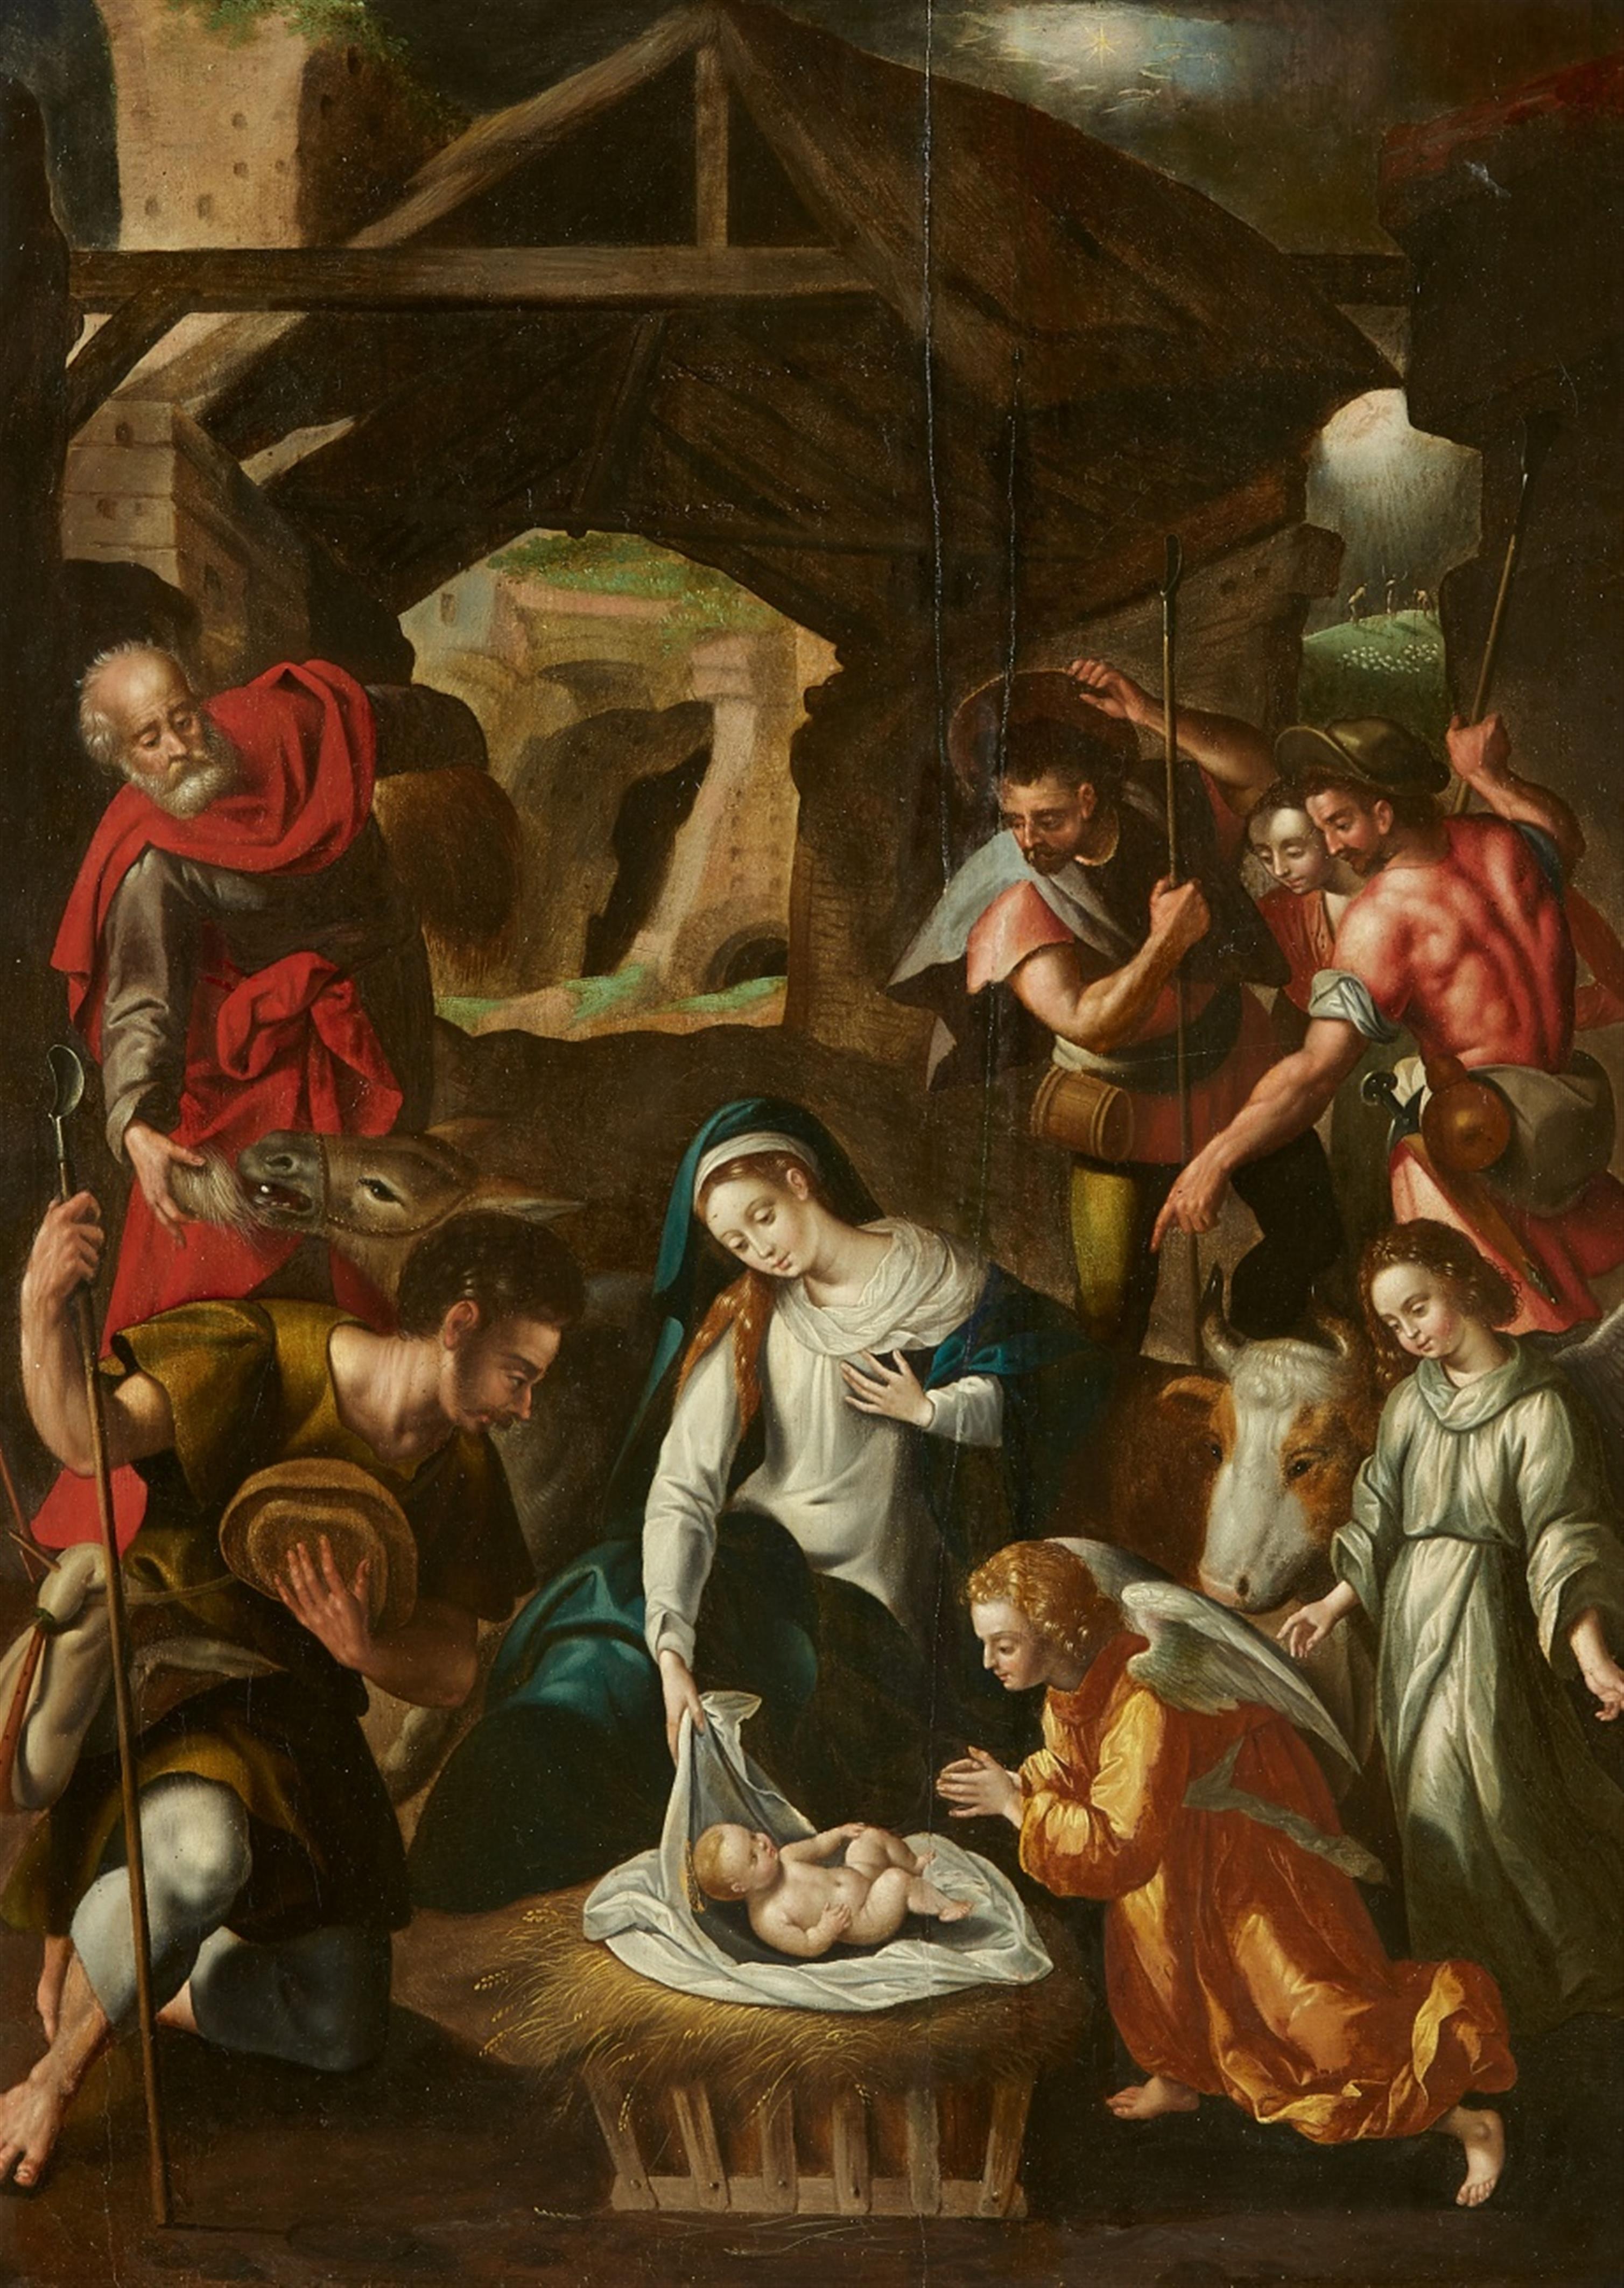 South German School, early 17th century - The Adoration of the Shepherds - image-1